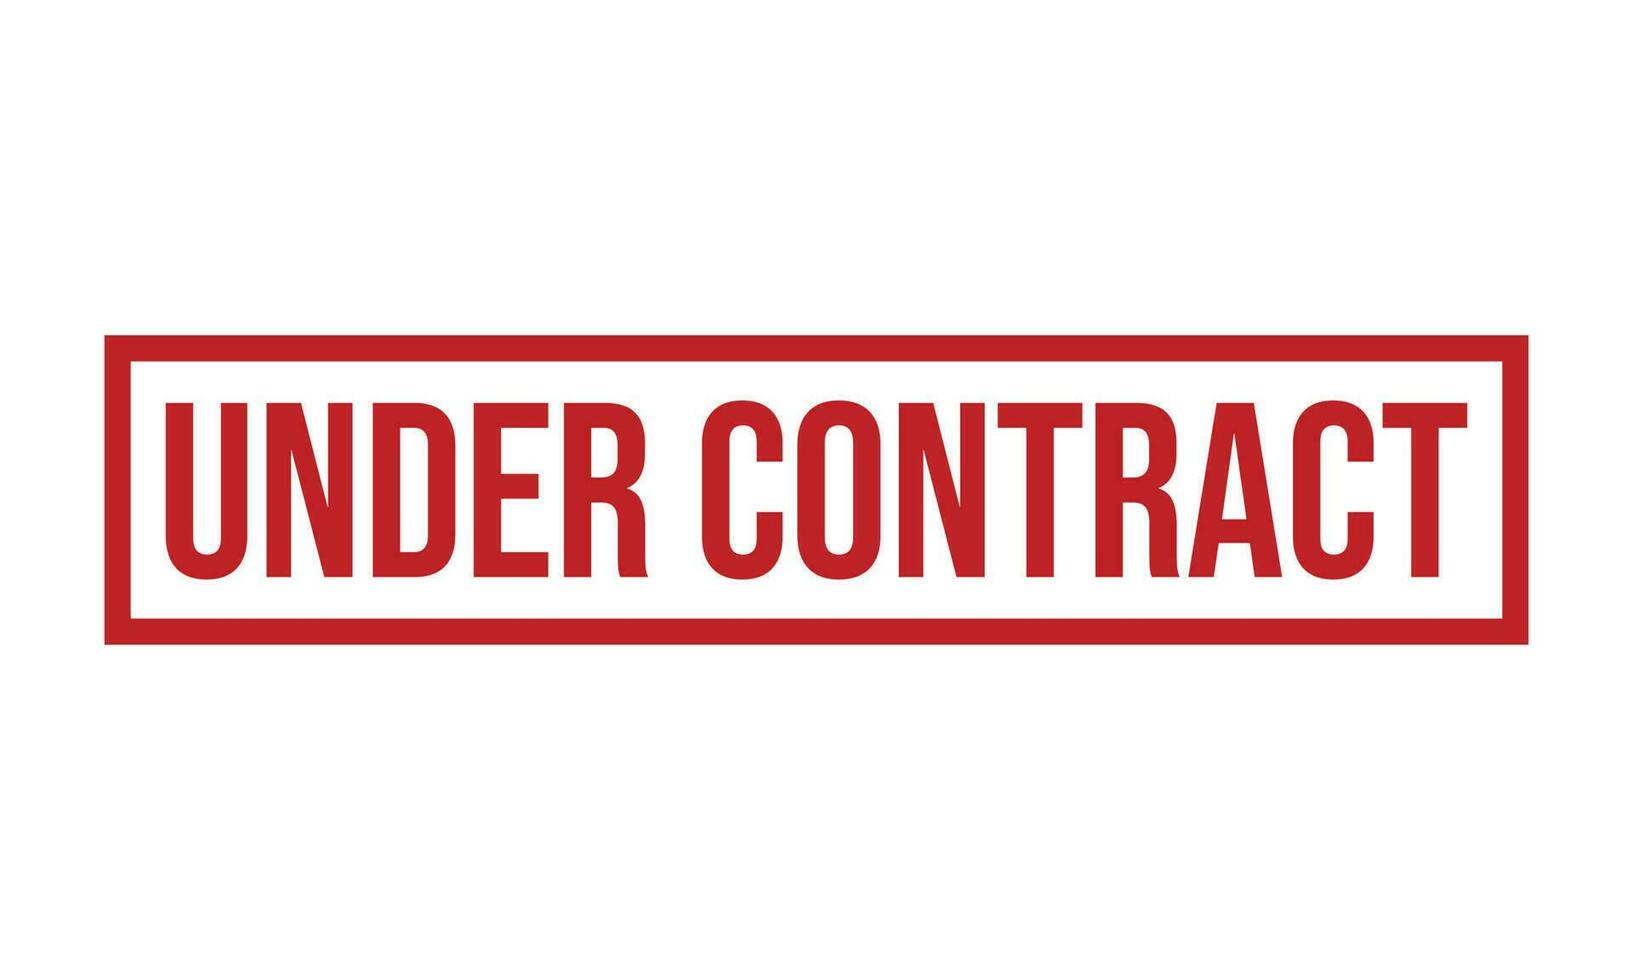 Under Contract Rubber Stamp. Under Contract Grunge Stamp Seal Vector Illustration